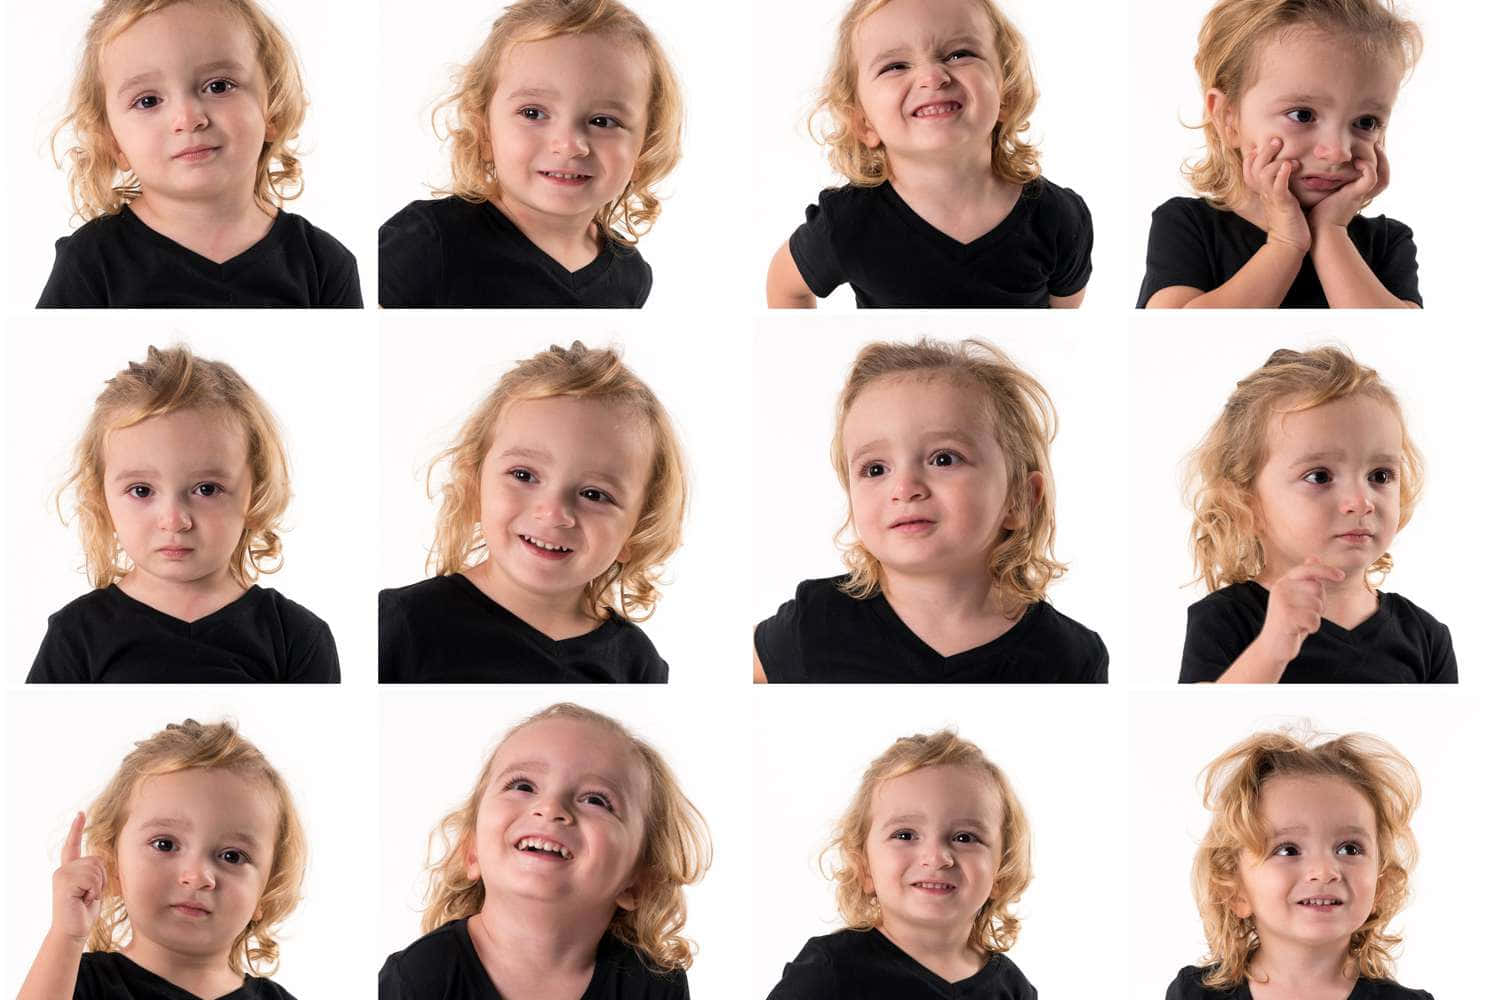 A Collage Of Different Faces Of A Little Girl